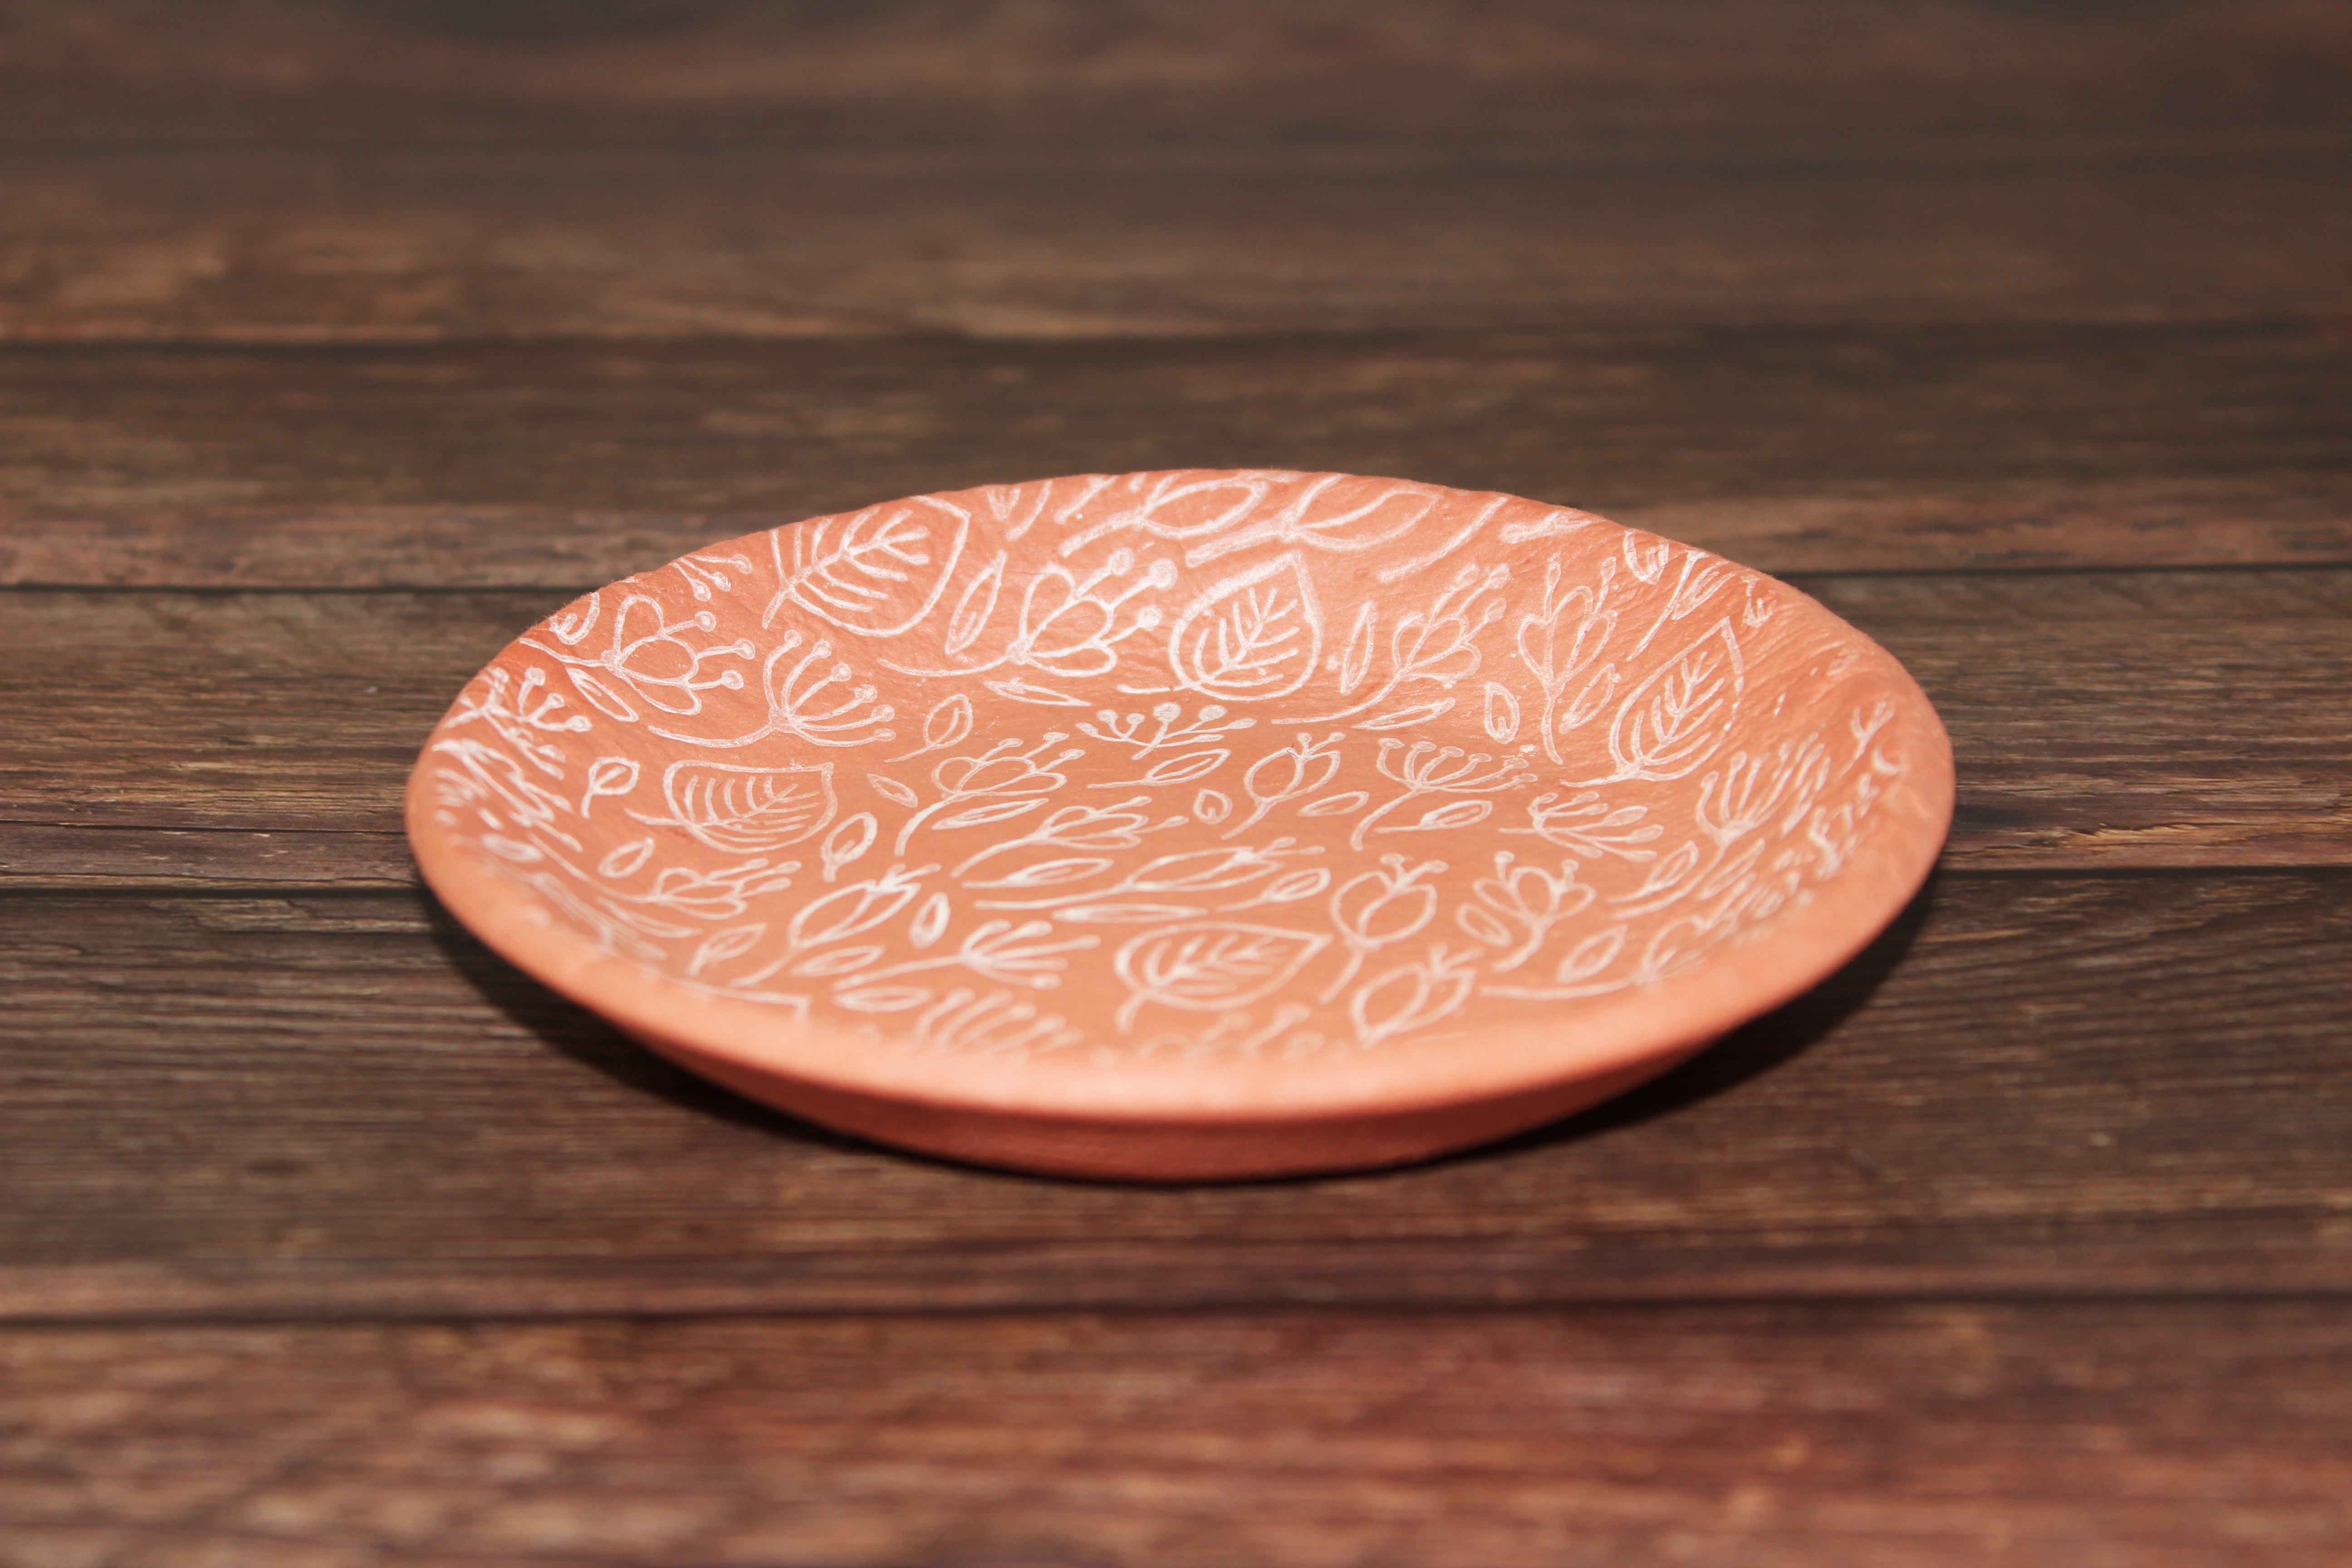 How to use air dry clay – air dry clay dish 4